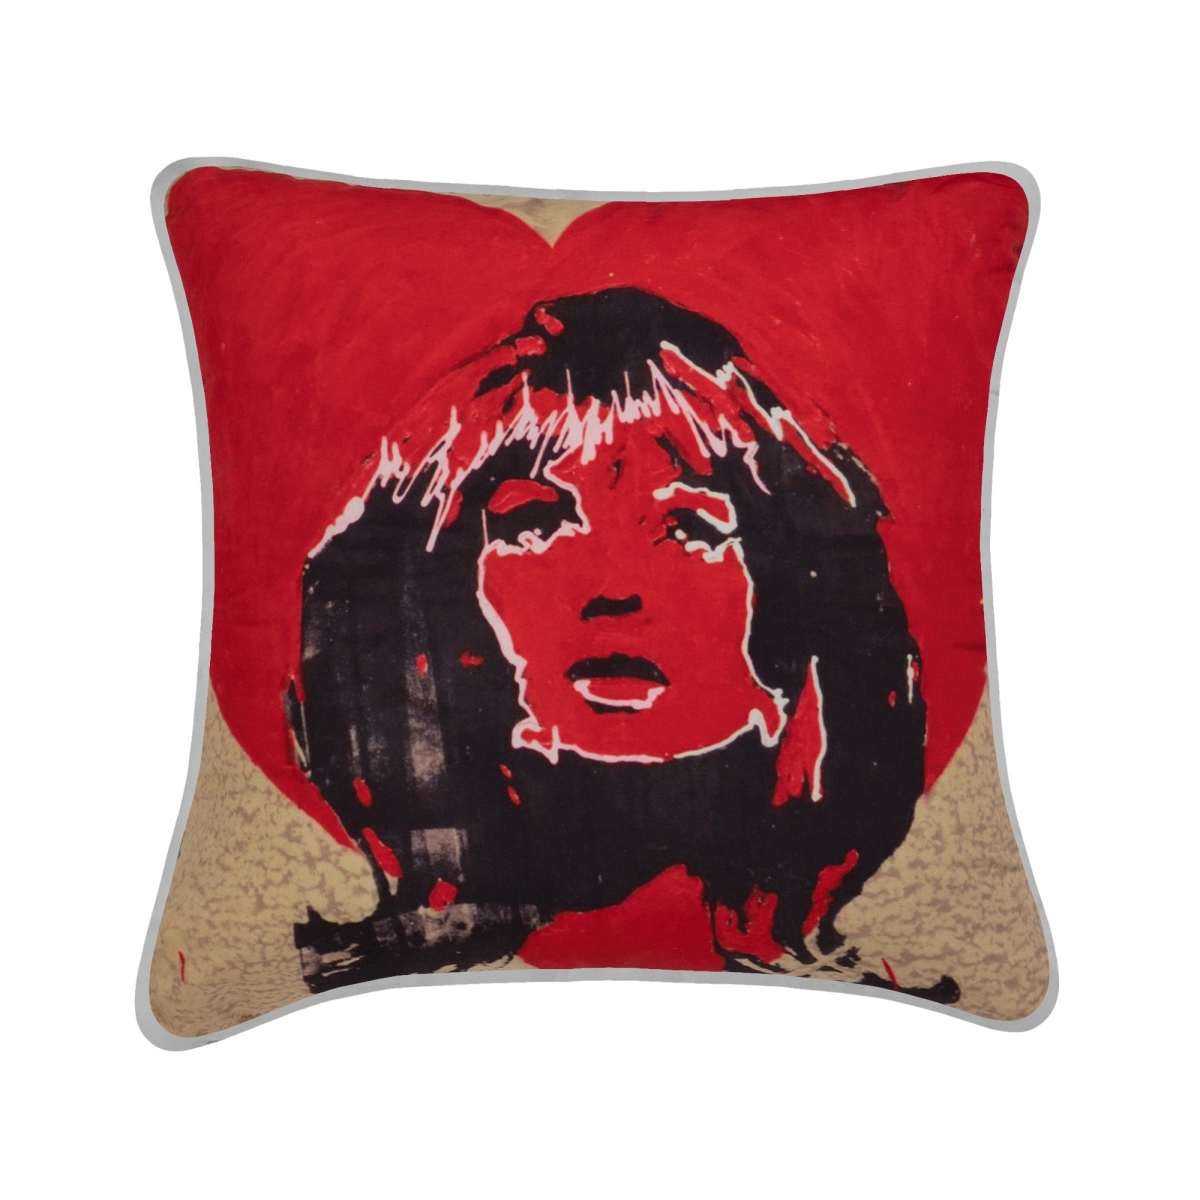 Sq-pi-jg-fther-wohe-1818 18 X 18 In. Jessica Gorlicky Woman Heart Decorative Cushion - 100 Percent Duck Feather